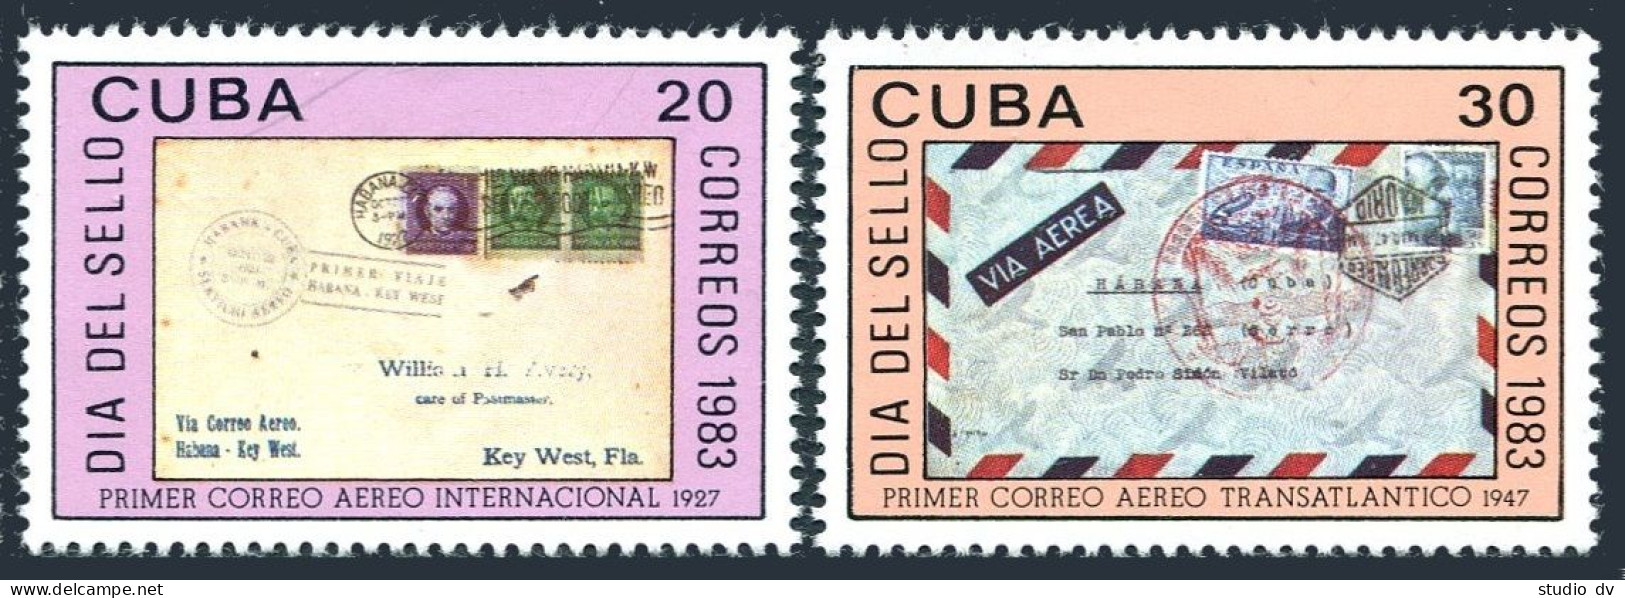 Cuba 2589-2590, MNH. Michel 2738-2739. Stamp Day 1983. Covers. - Neufs